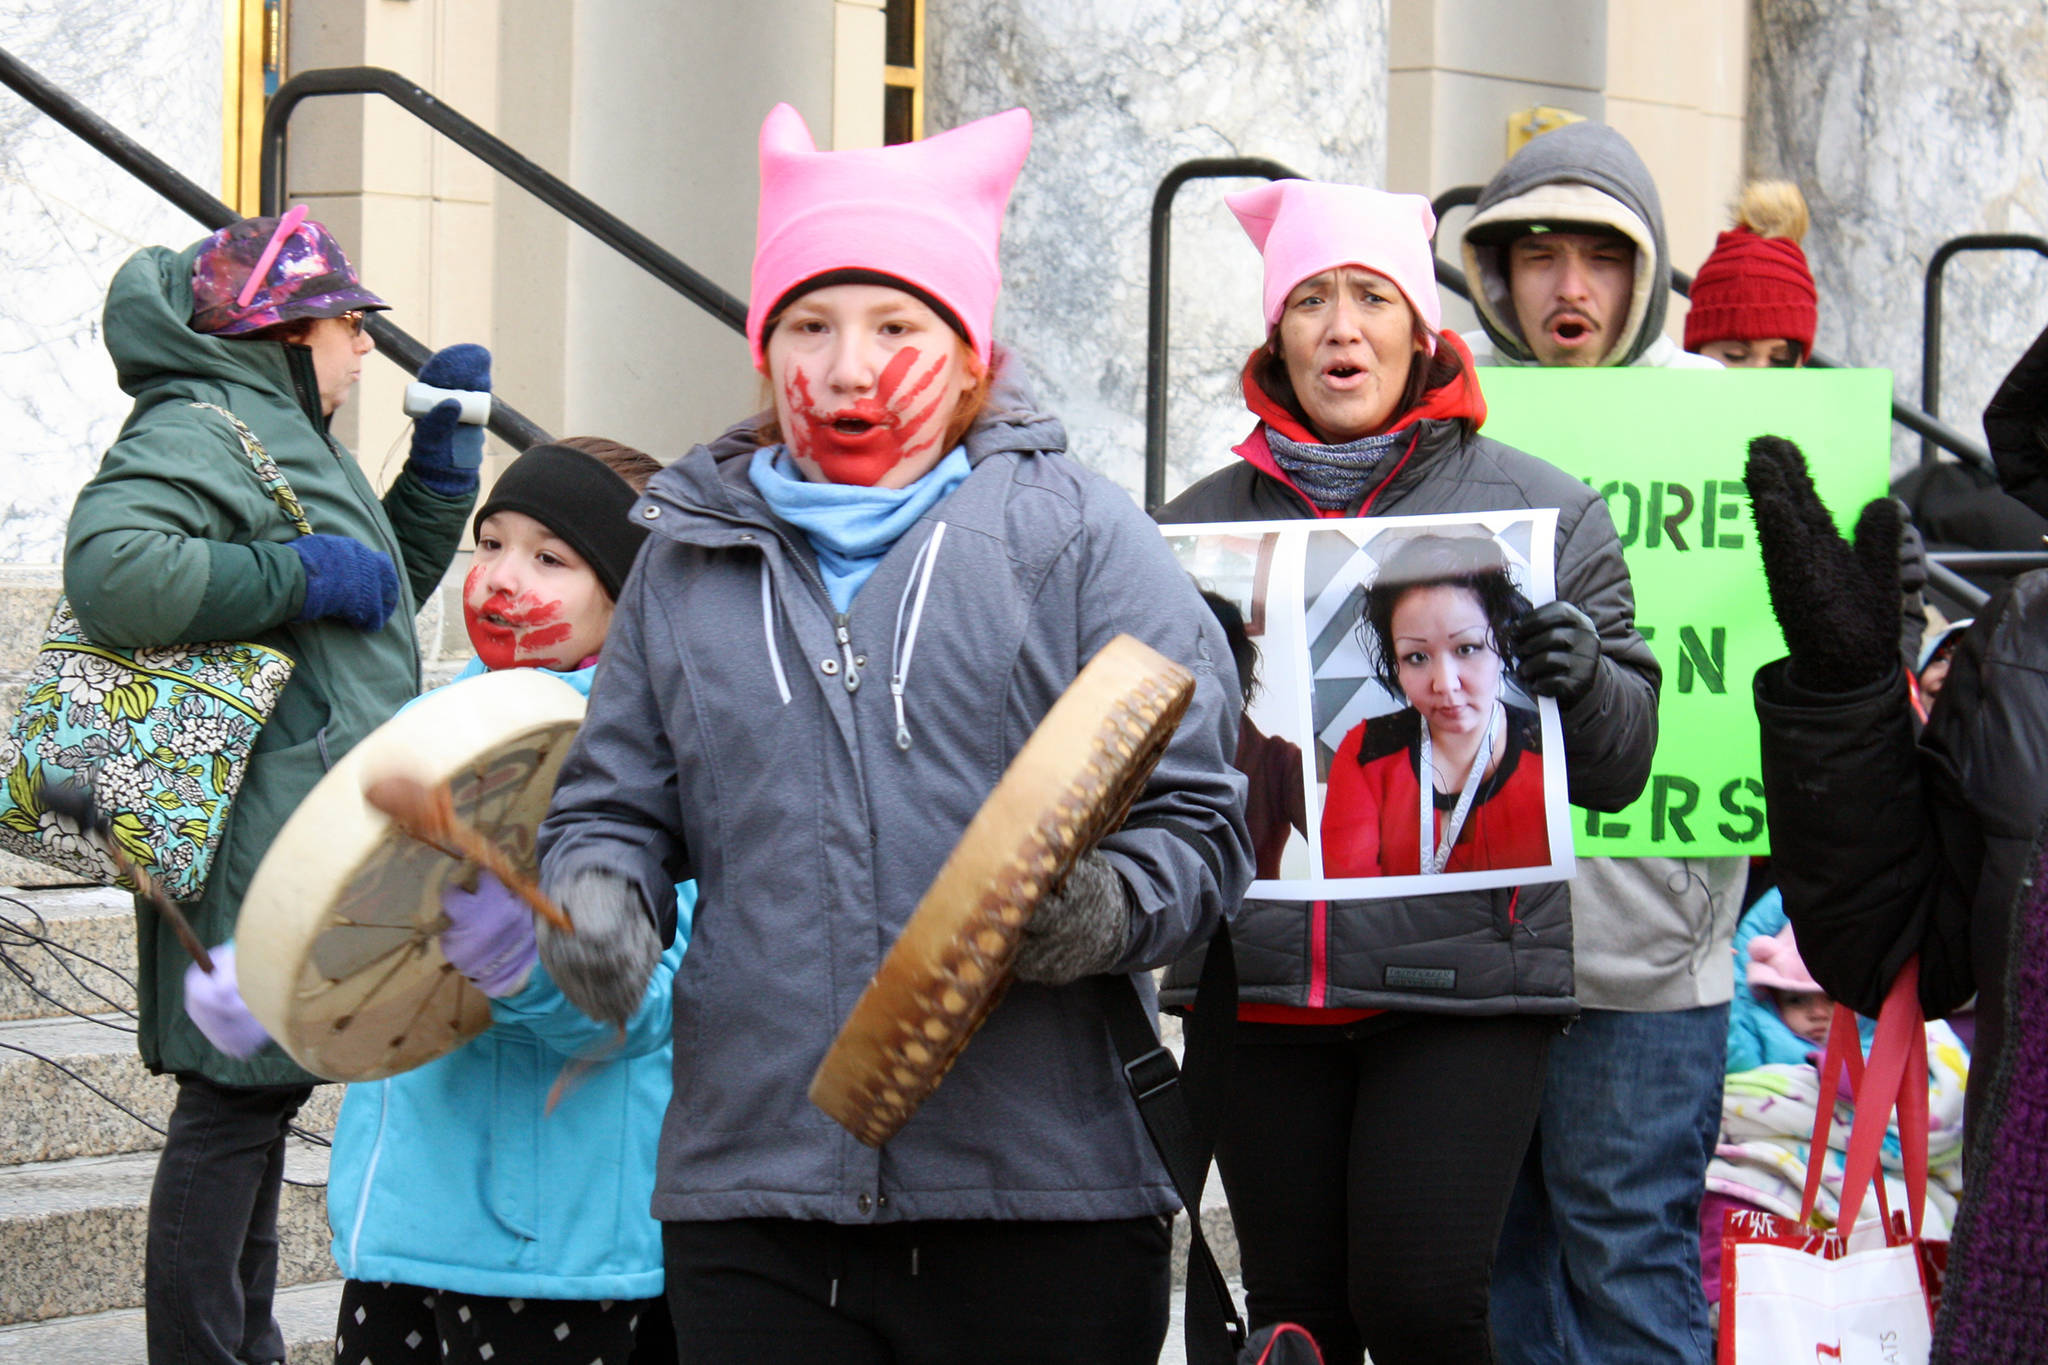 Why they march: Juneau women tell us in their own words